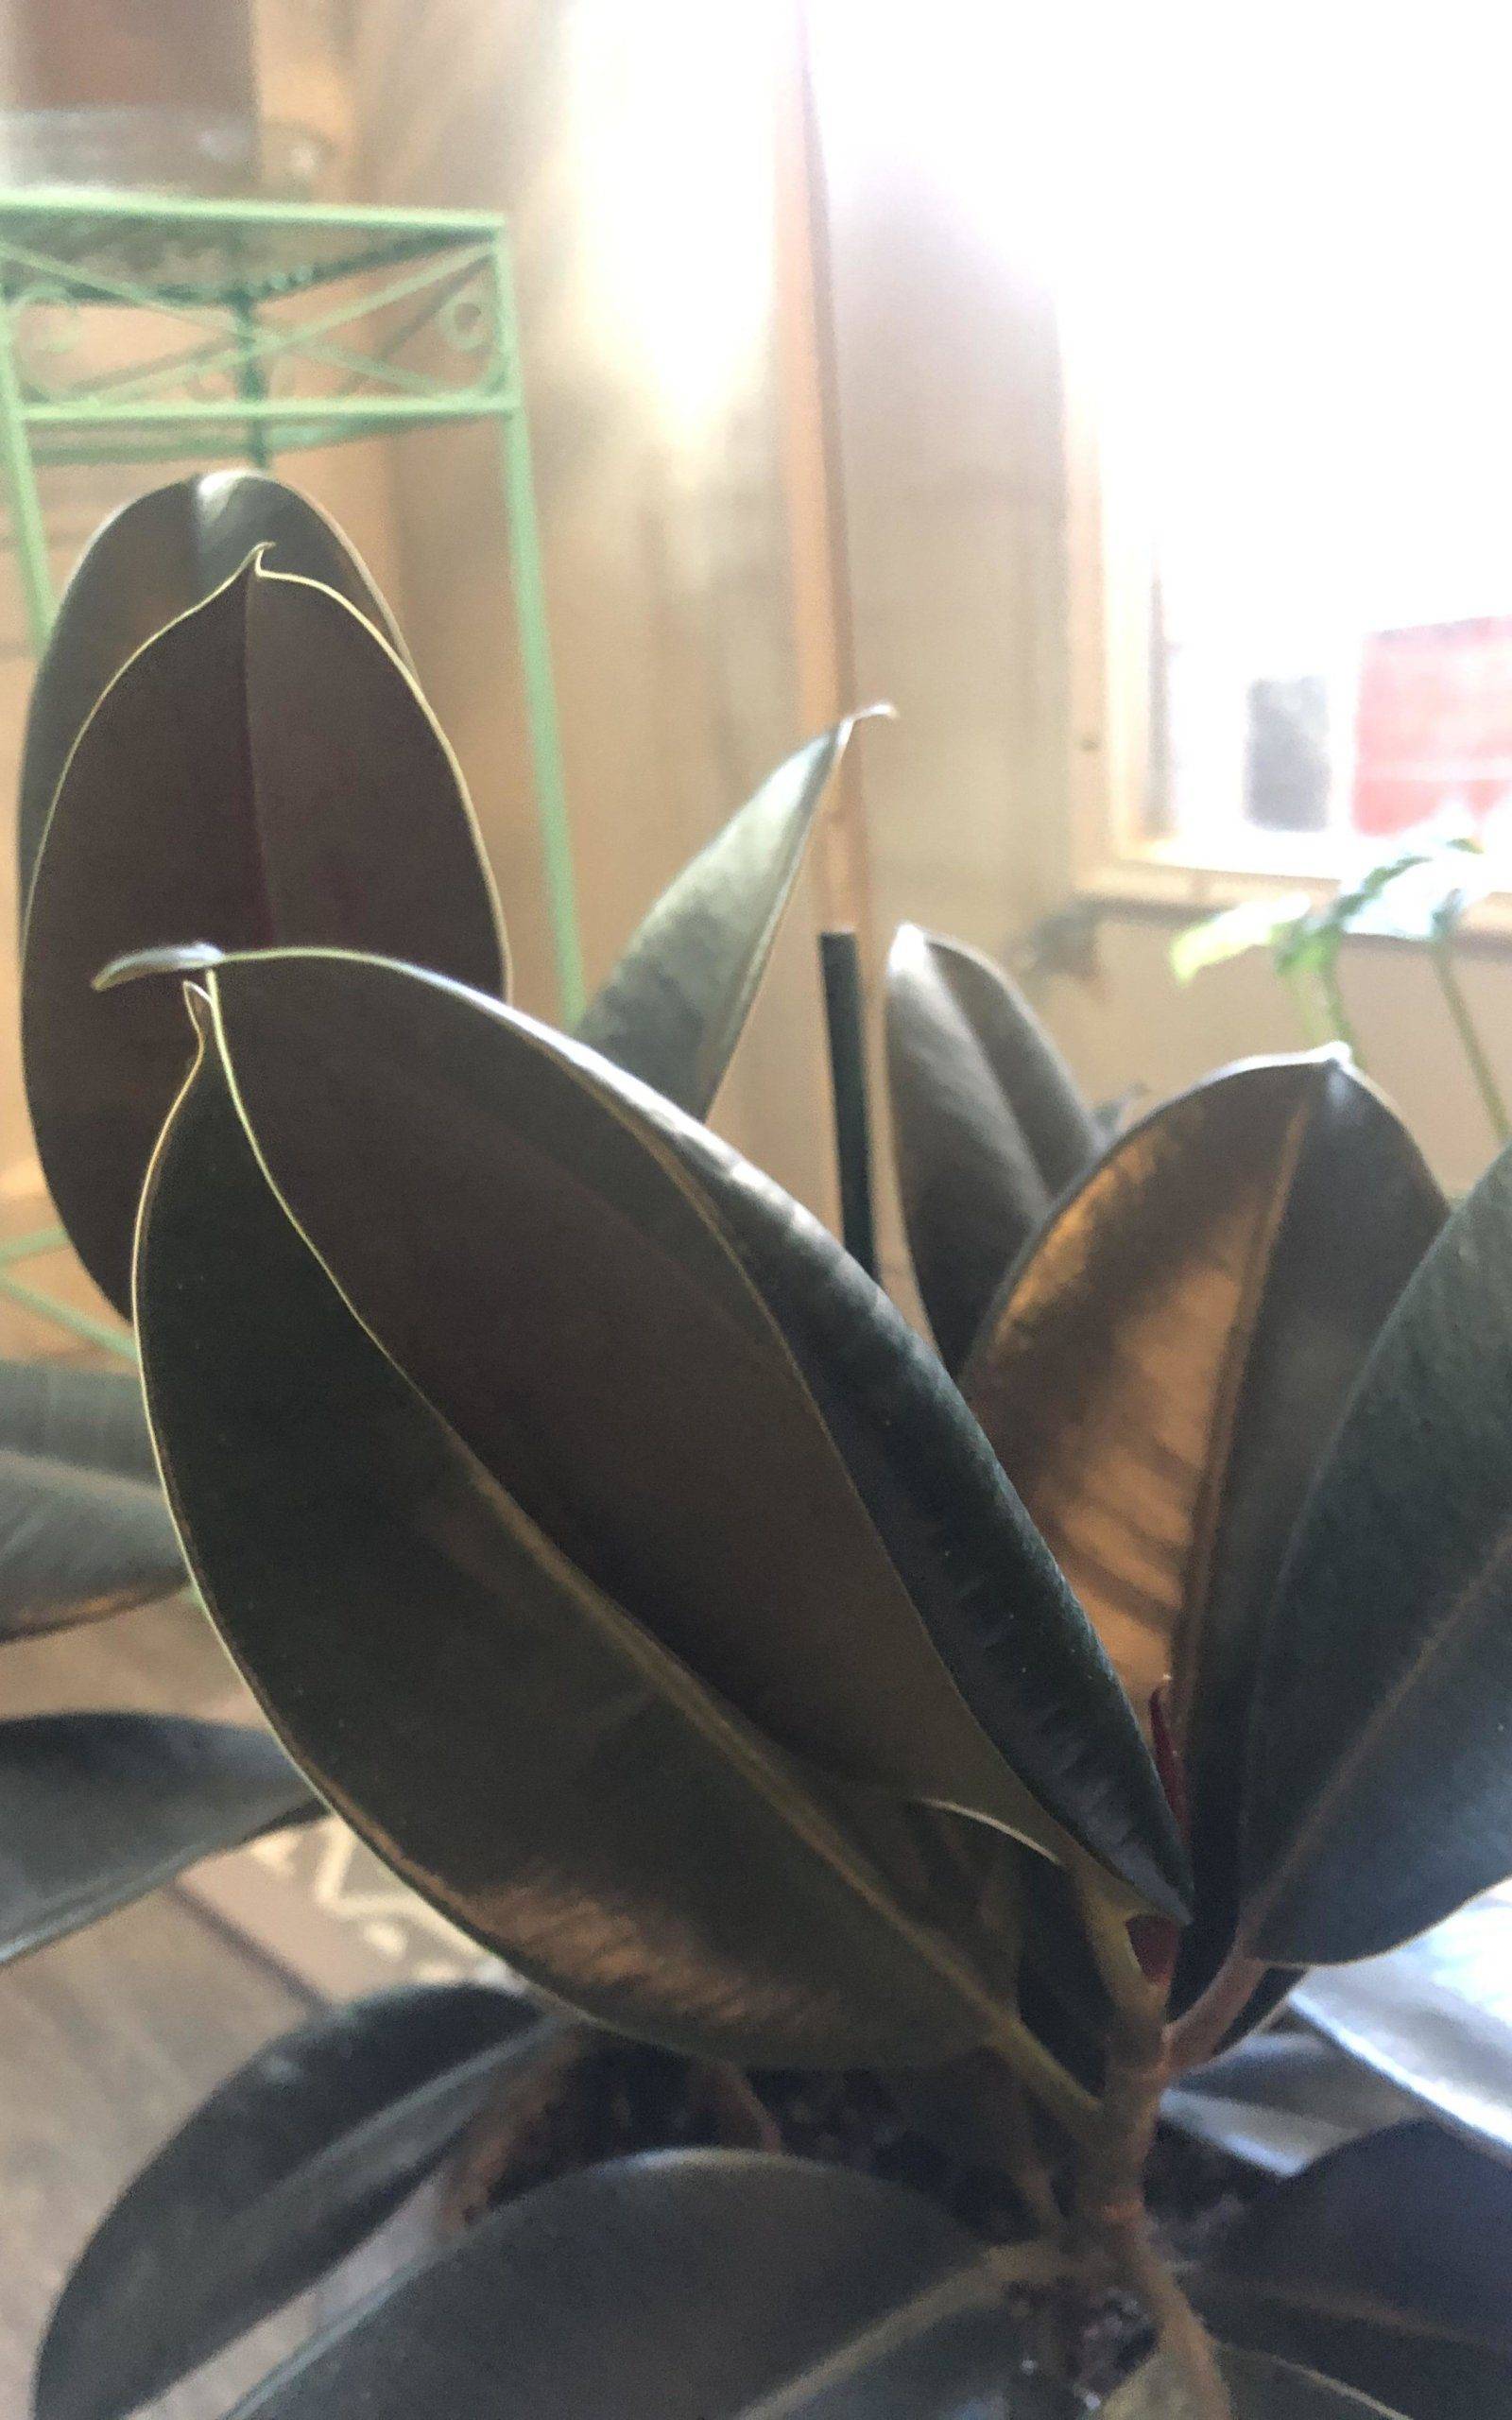 Why do Rubber Tree Leaves curl